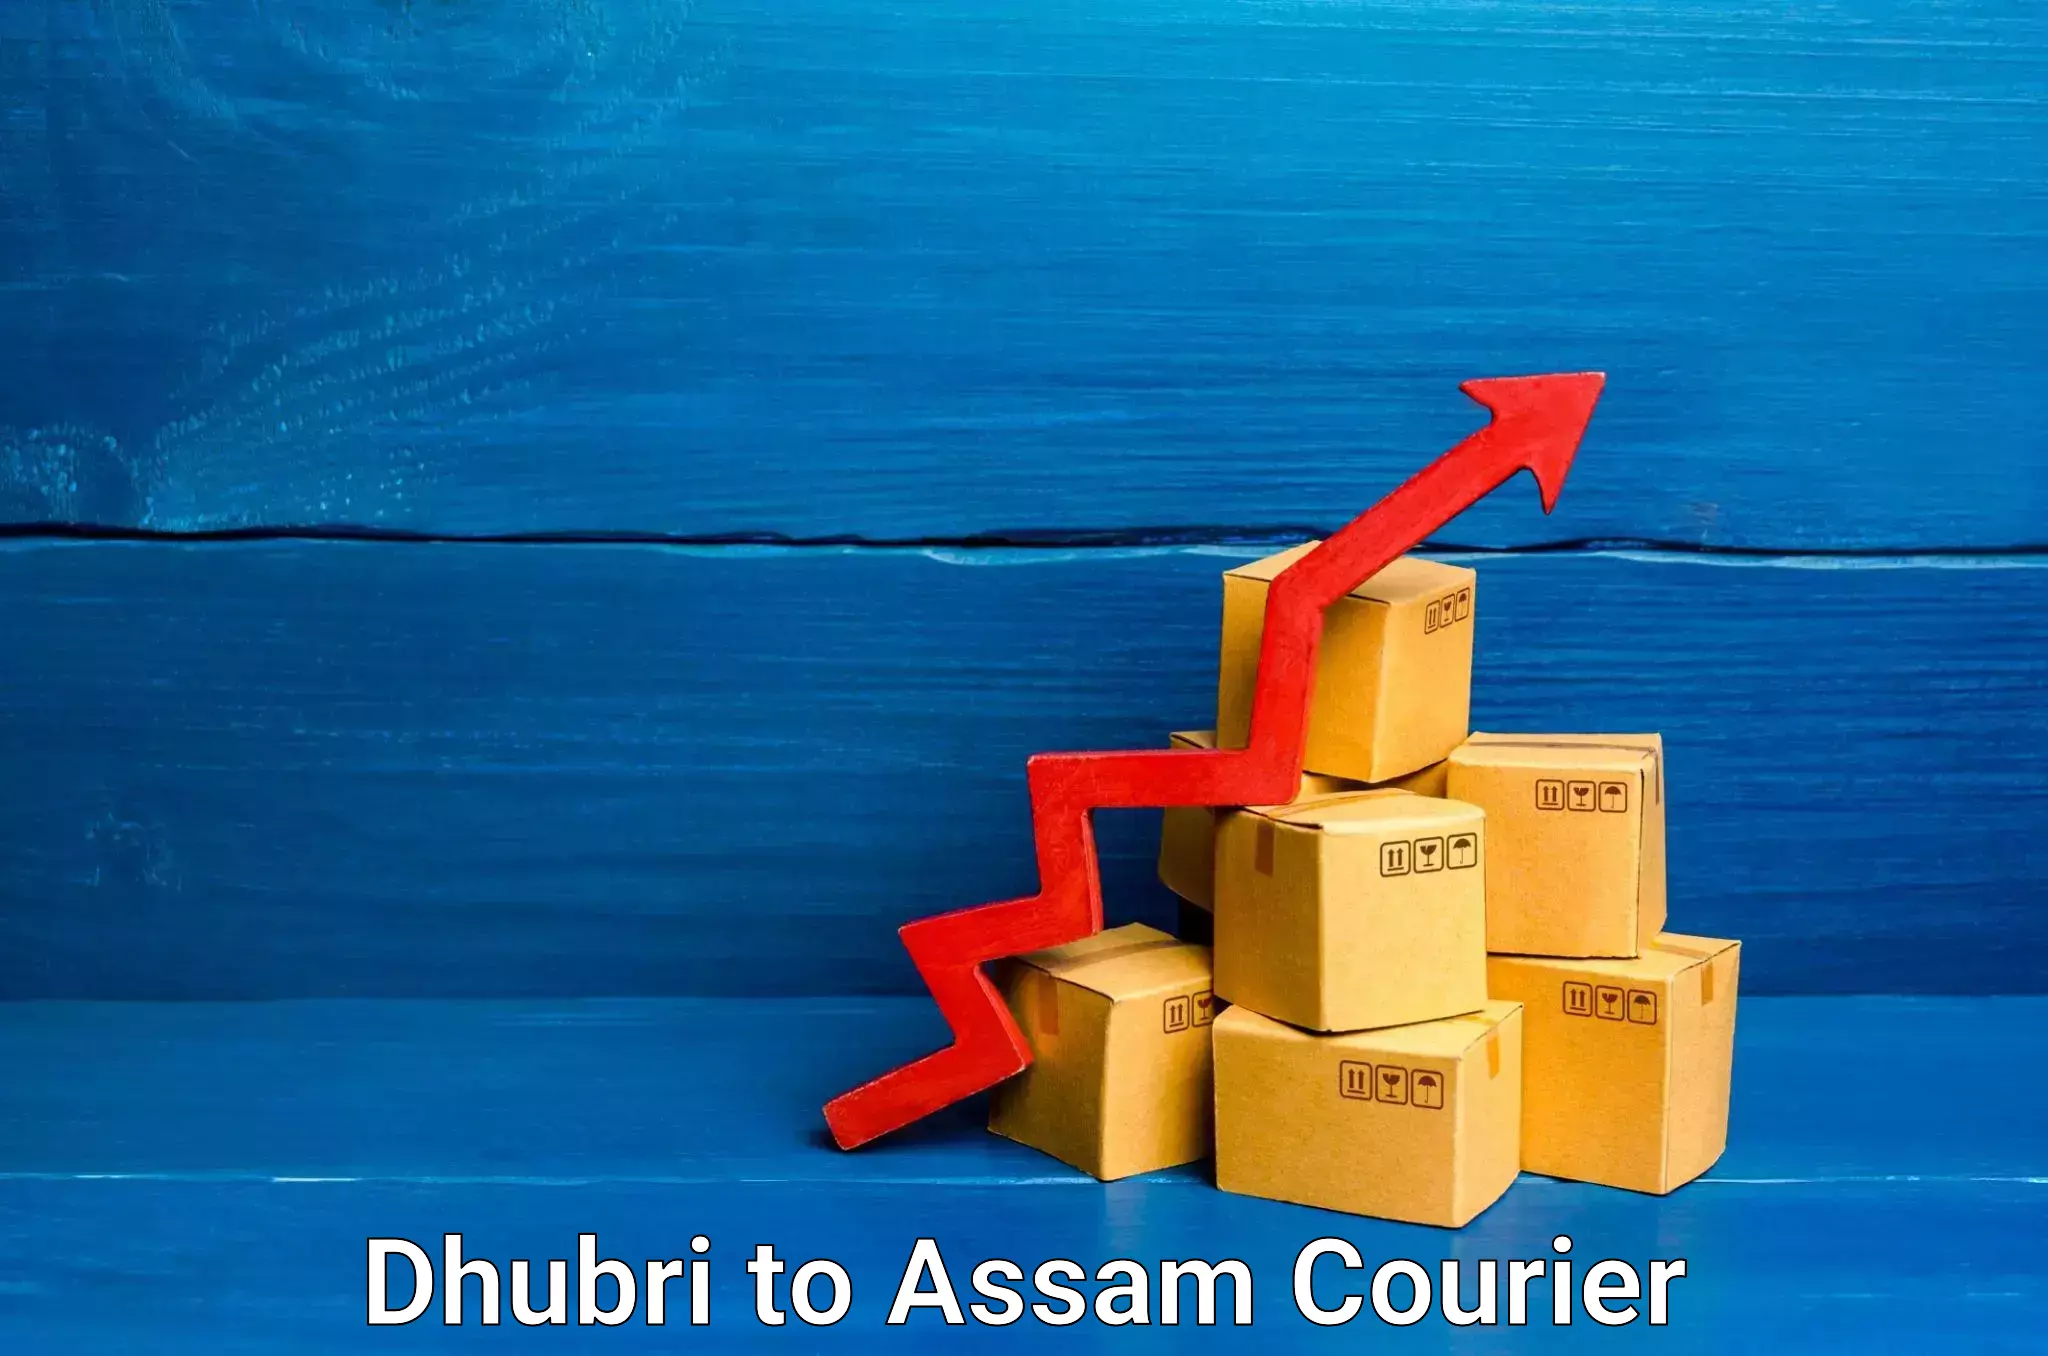 Cargo delivery service Dhubri to Majuli